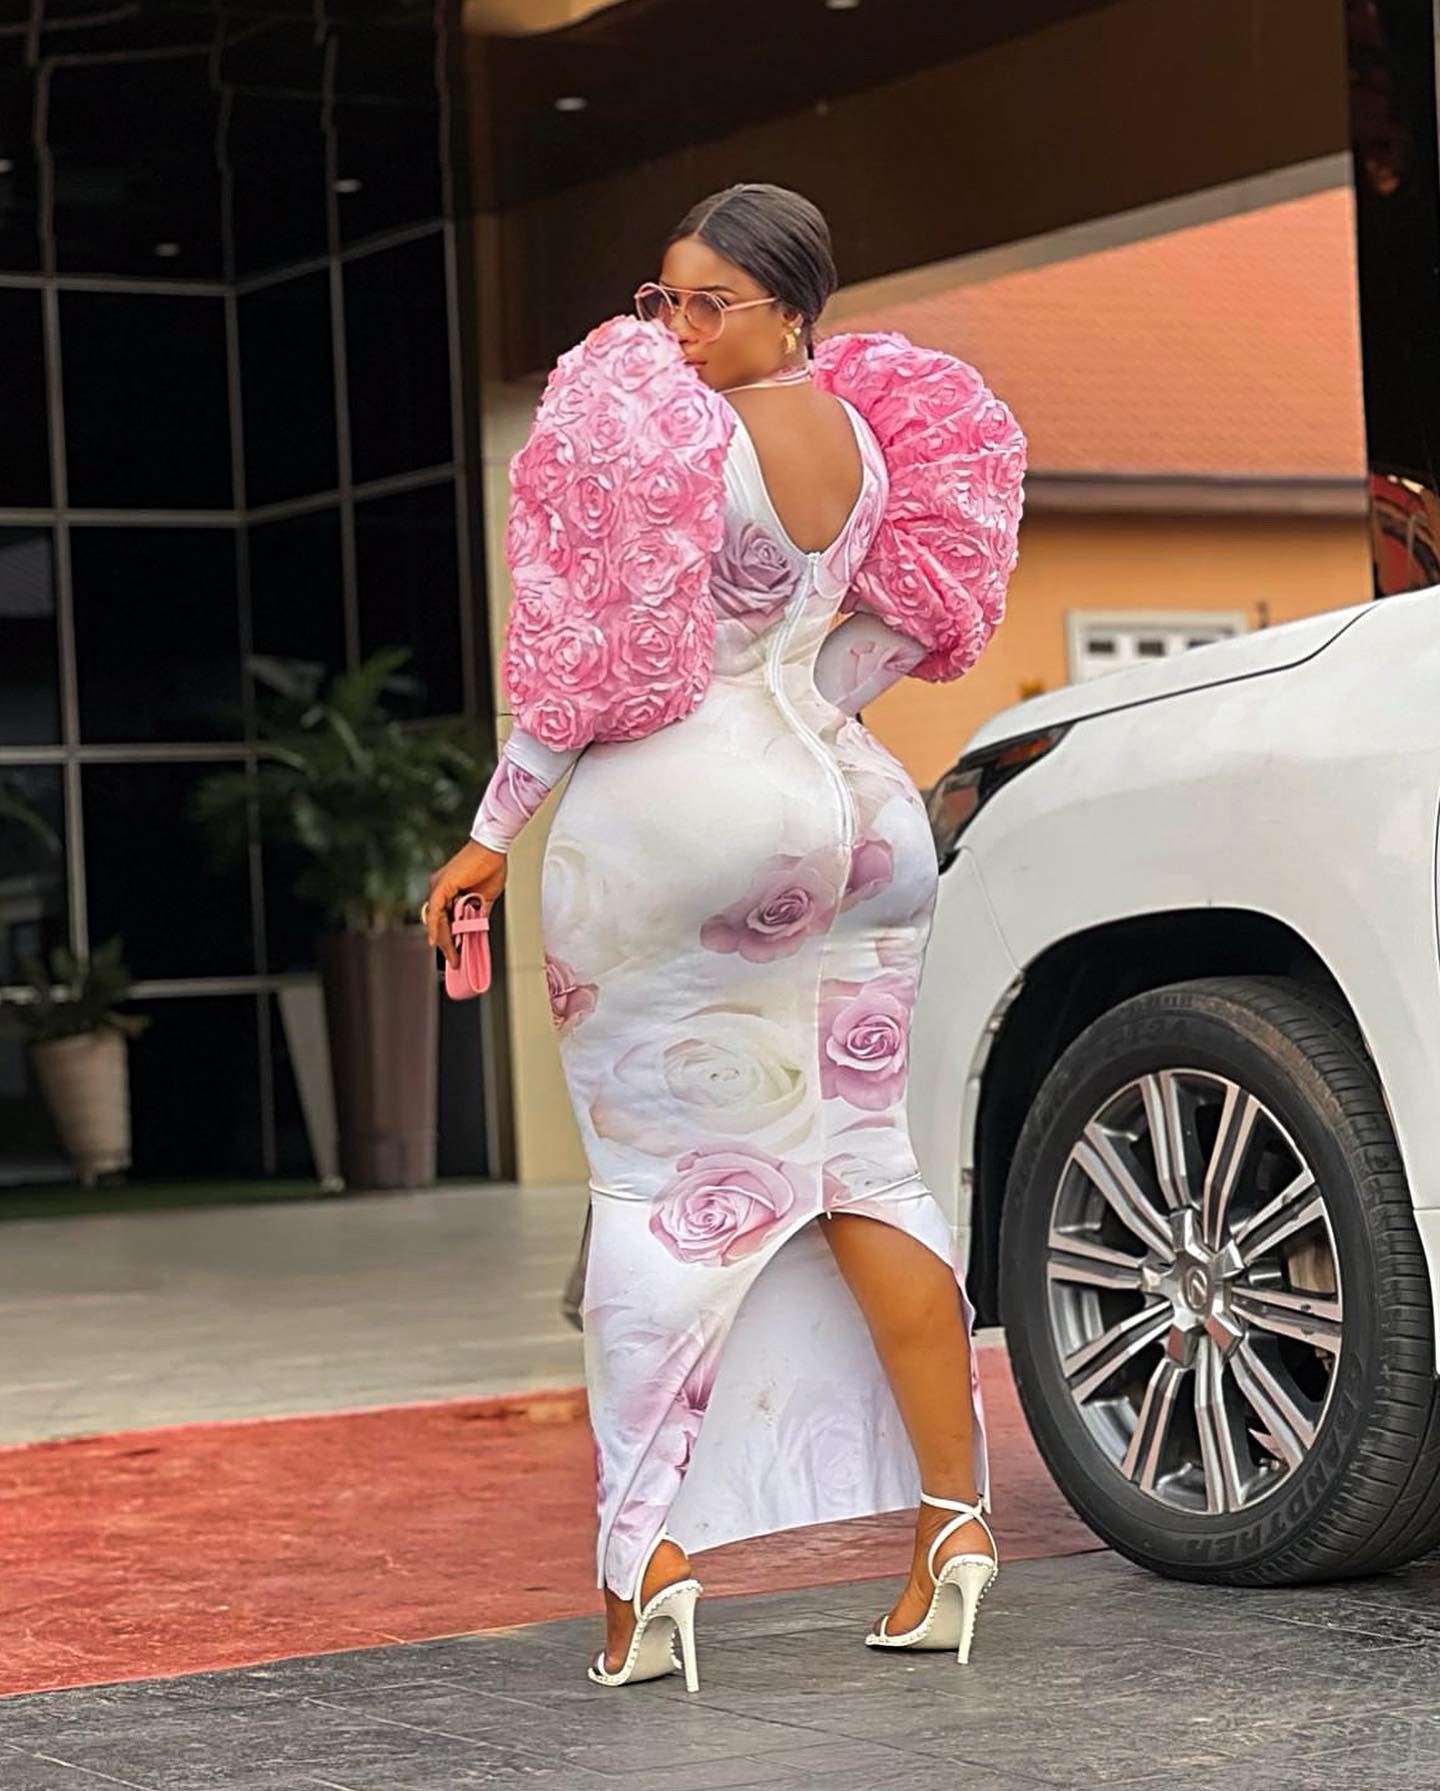 Destiny Etiko Sets Social Media on Fire with Sizzling New Outfit (Photos)